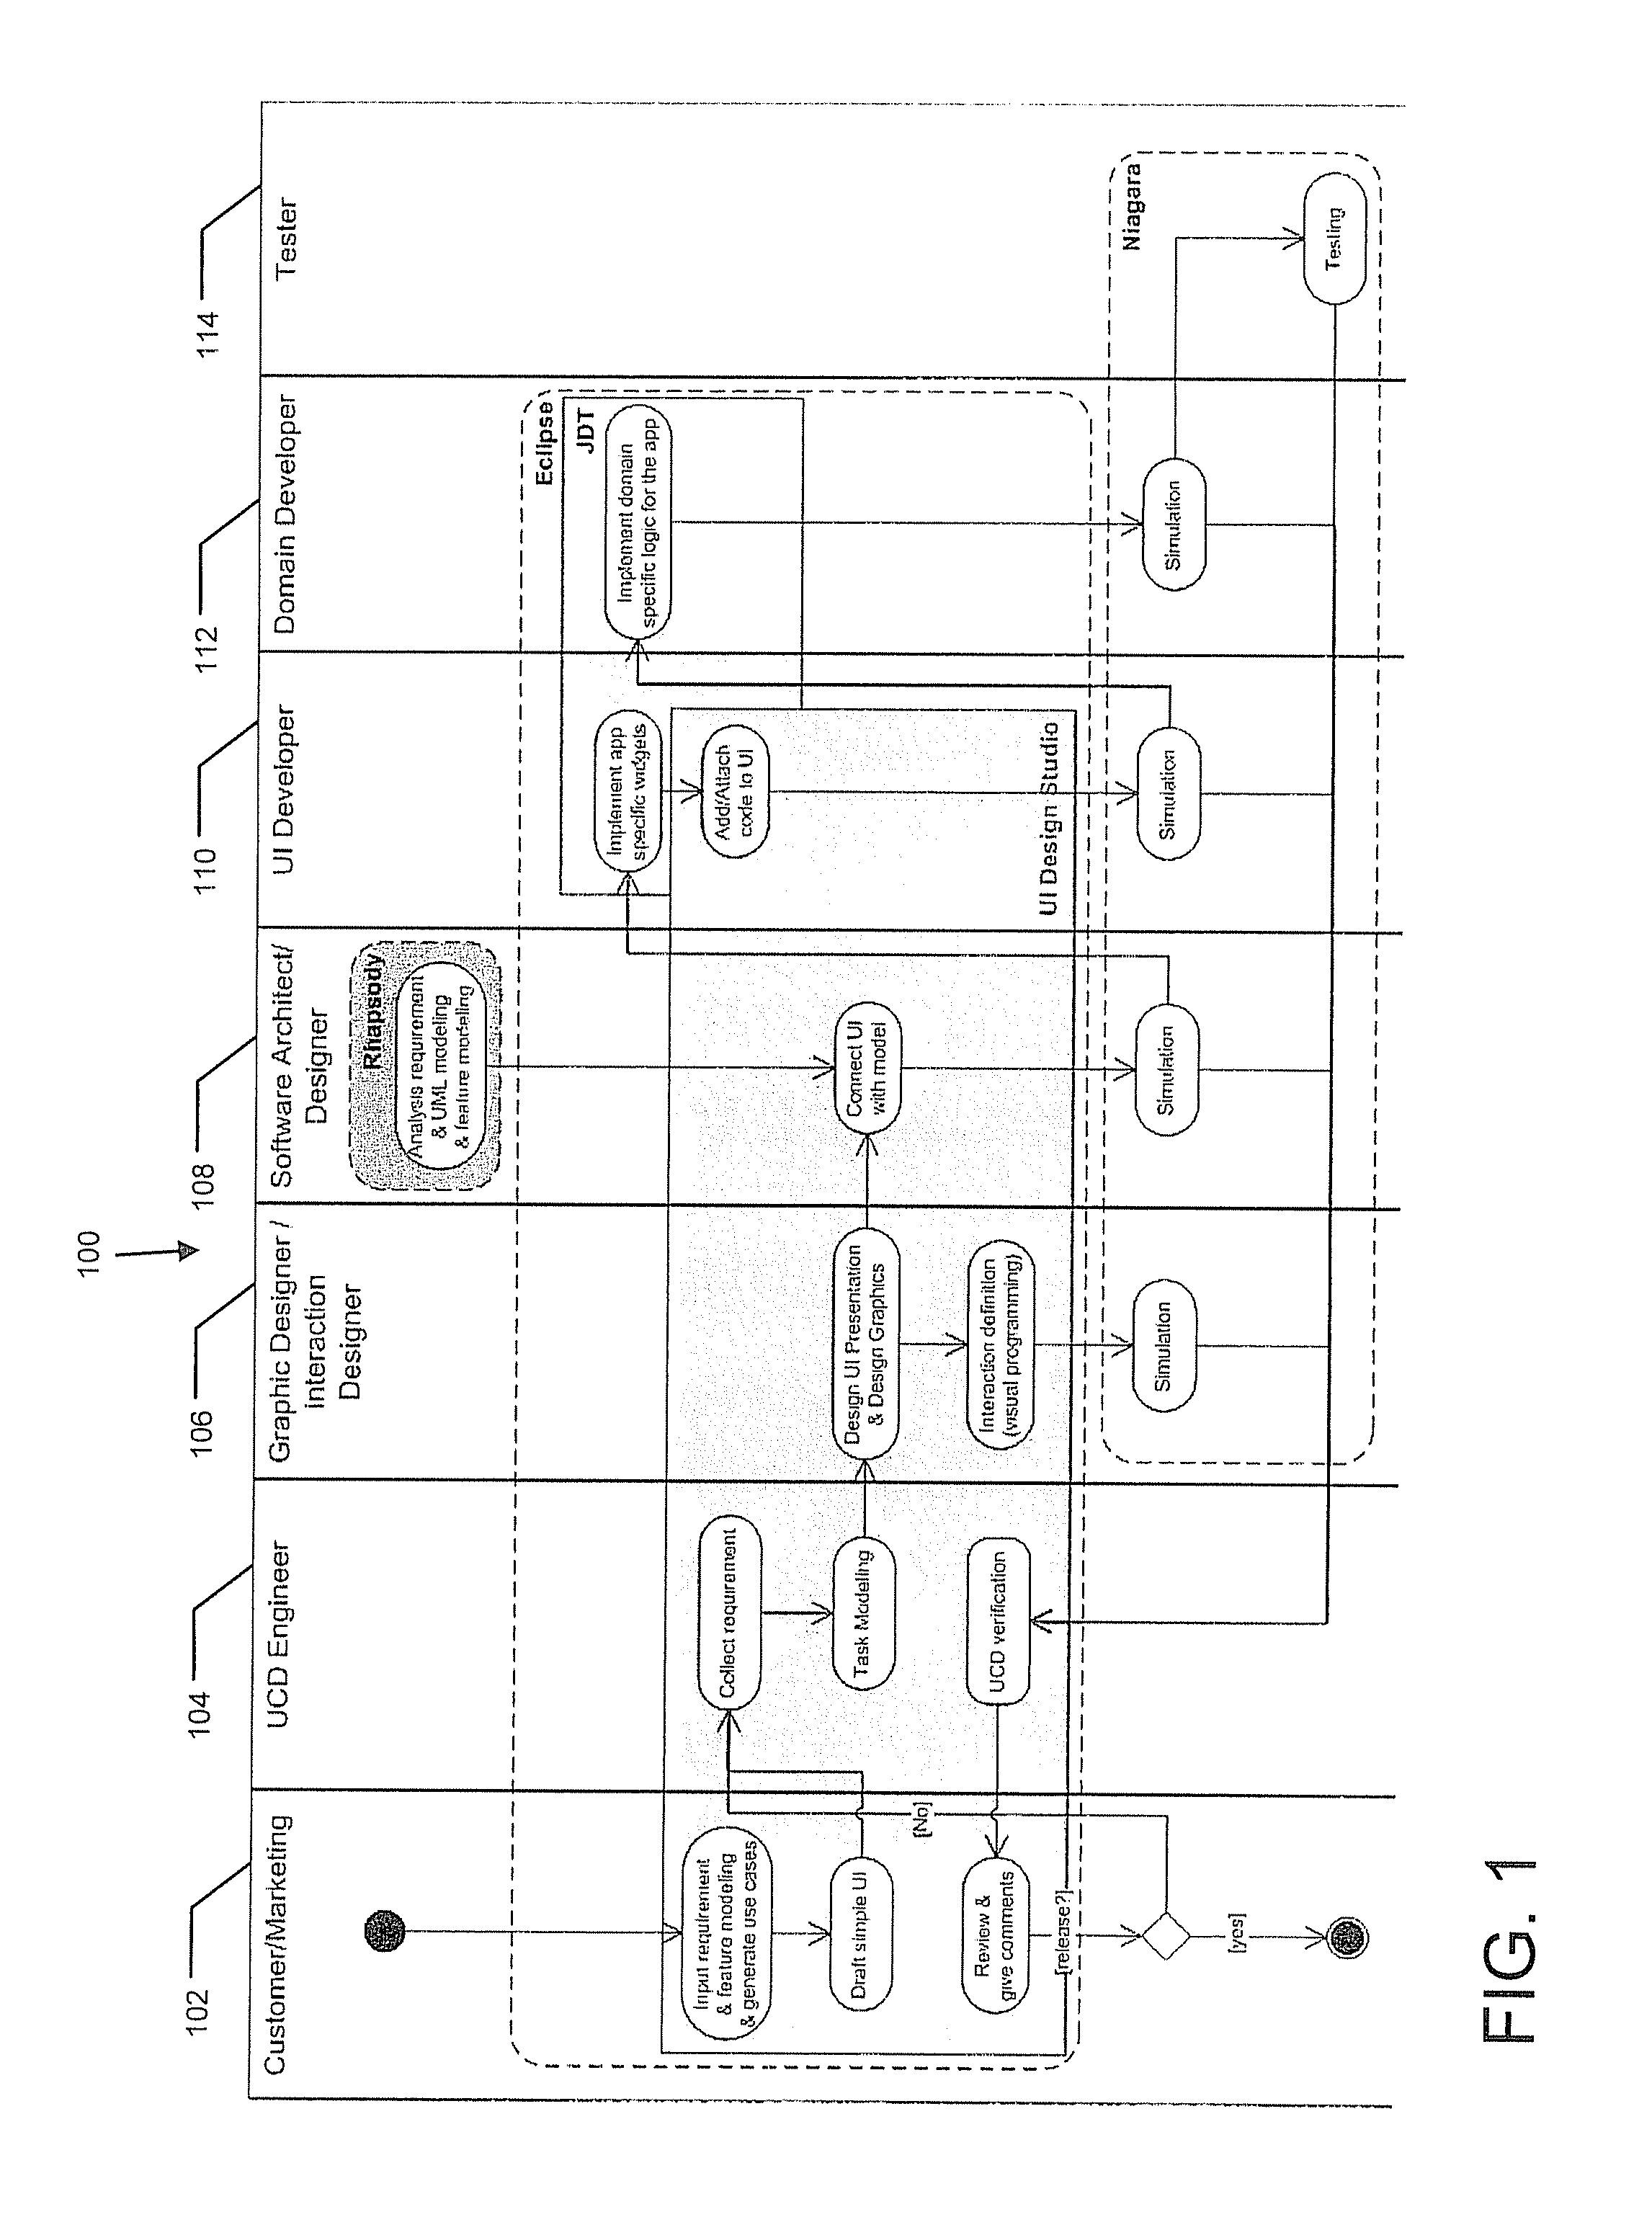 Method and System for Extending Task Models for Use In User-Interface Design